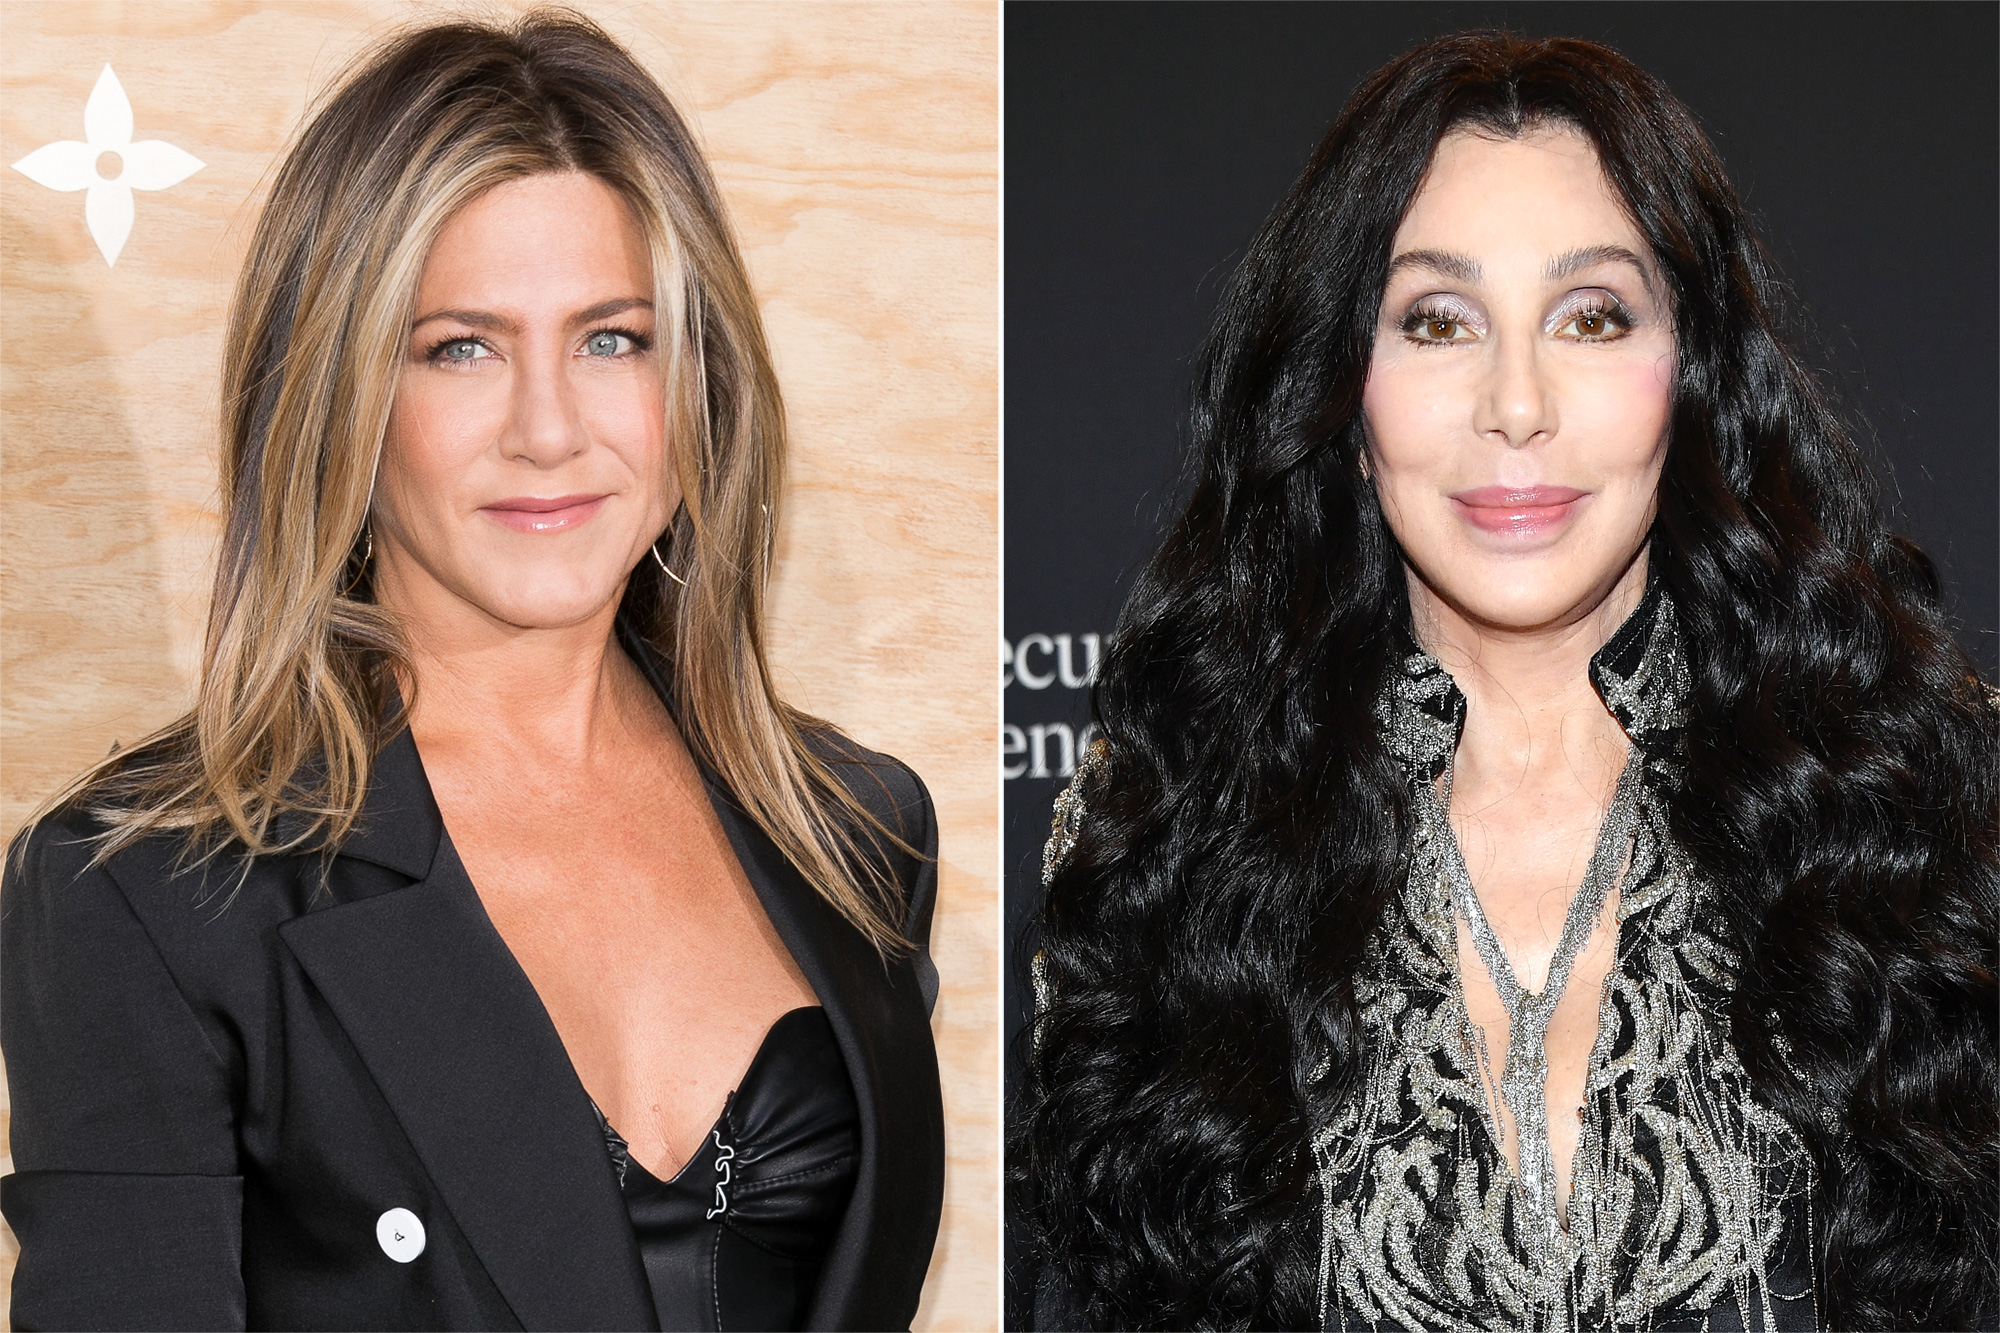 Jennifer Aniston dishes on hanging out at Cher's house as a teen: 'It was just fun'